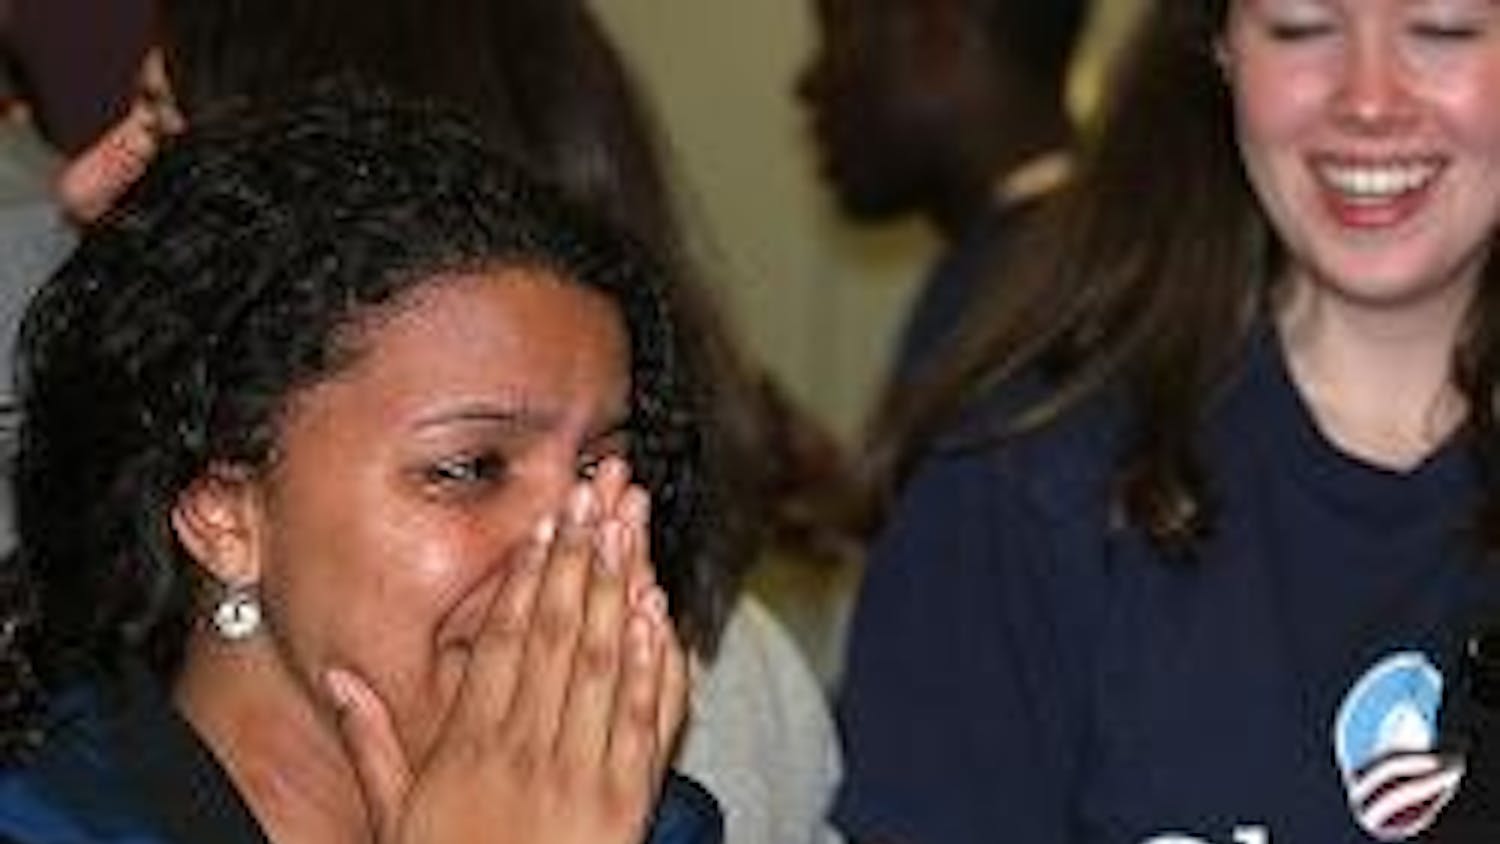 TEARS OF JOY - AU student Paula Ramirez reacts with great emotion following the announcement that Barack Obama will serve as the United States' 44th presdent.